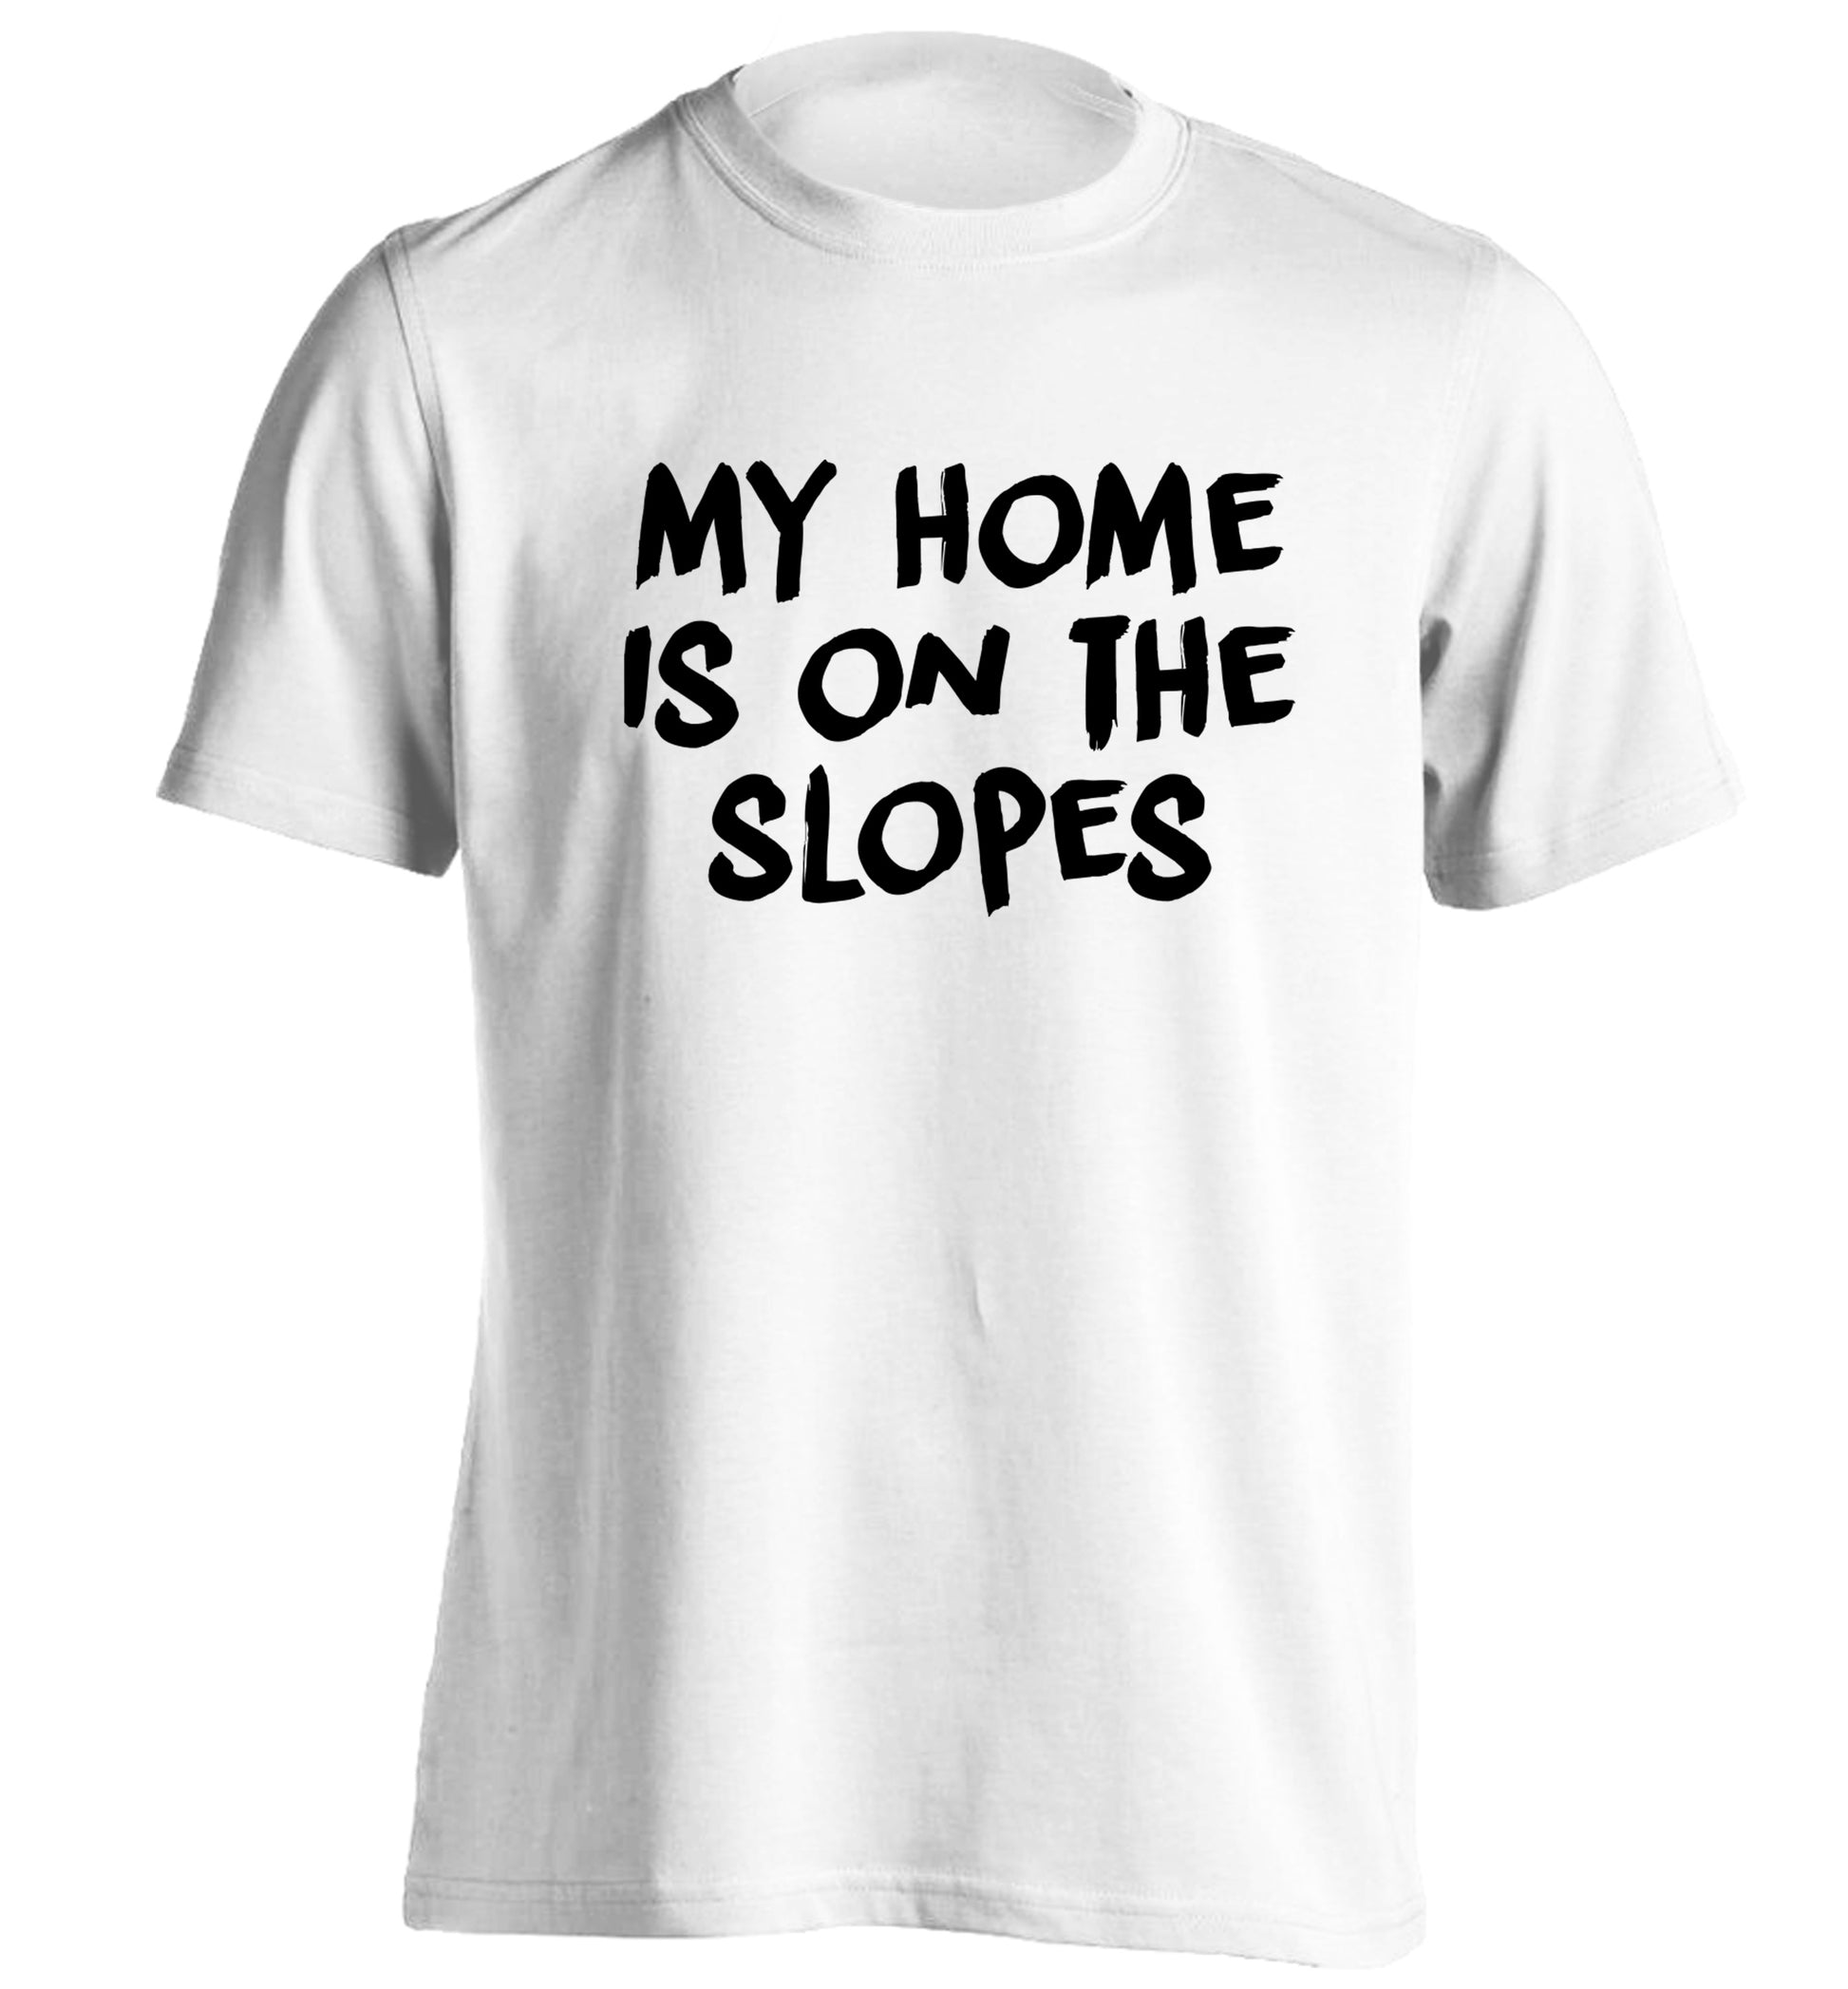 My home is on the slopes adults unisexwhite Tshirt 2XL